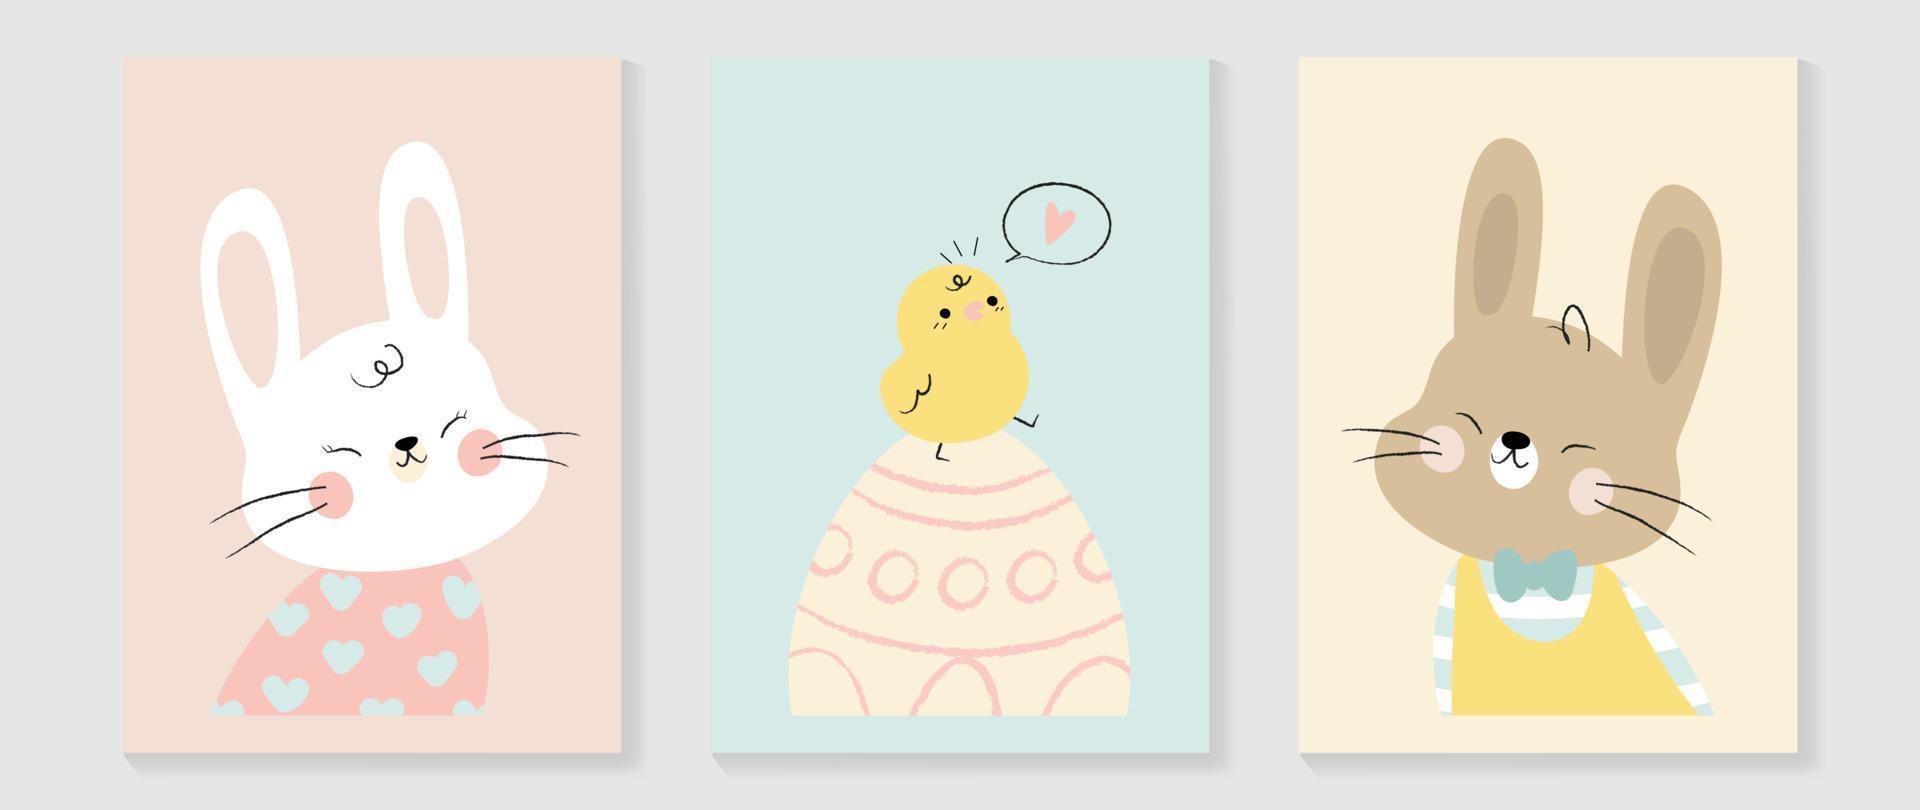 Cute comic easter wall art vector set. Collection with adorable hand drawn rabbit, easter egg, chick. Design illustration for nursery wall art in doodle style, baby, kids poster, card, invitation.